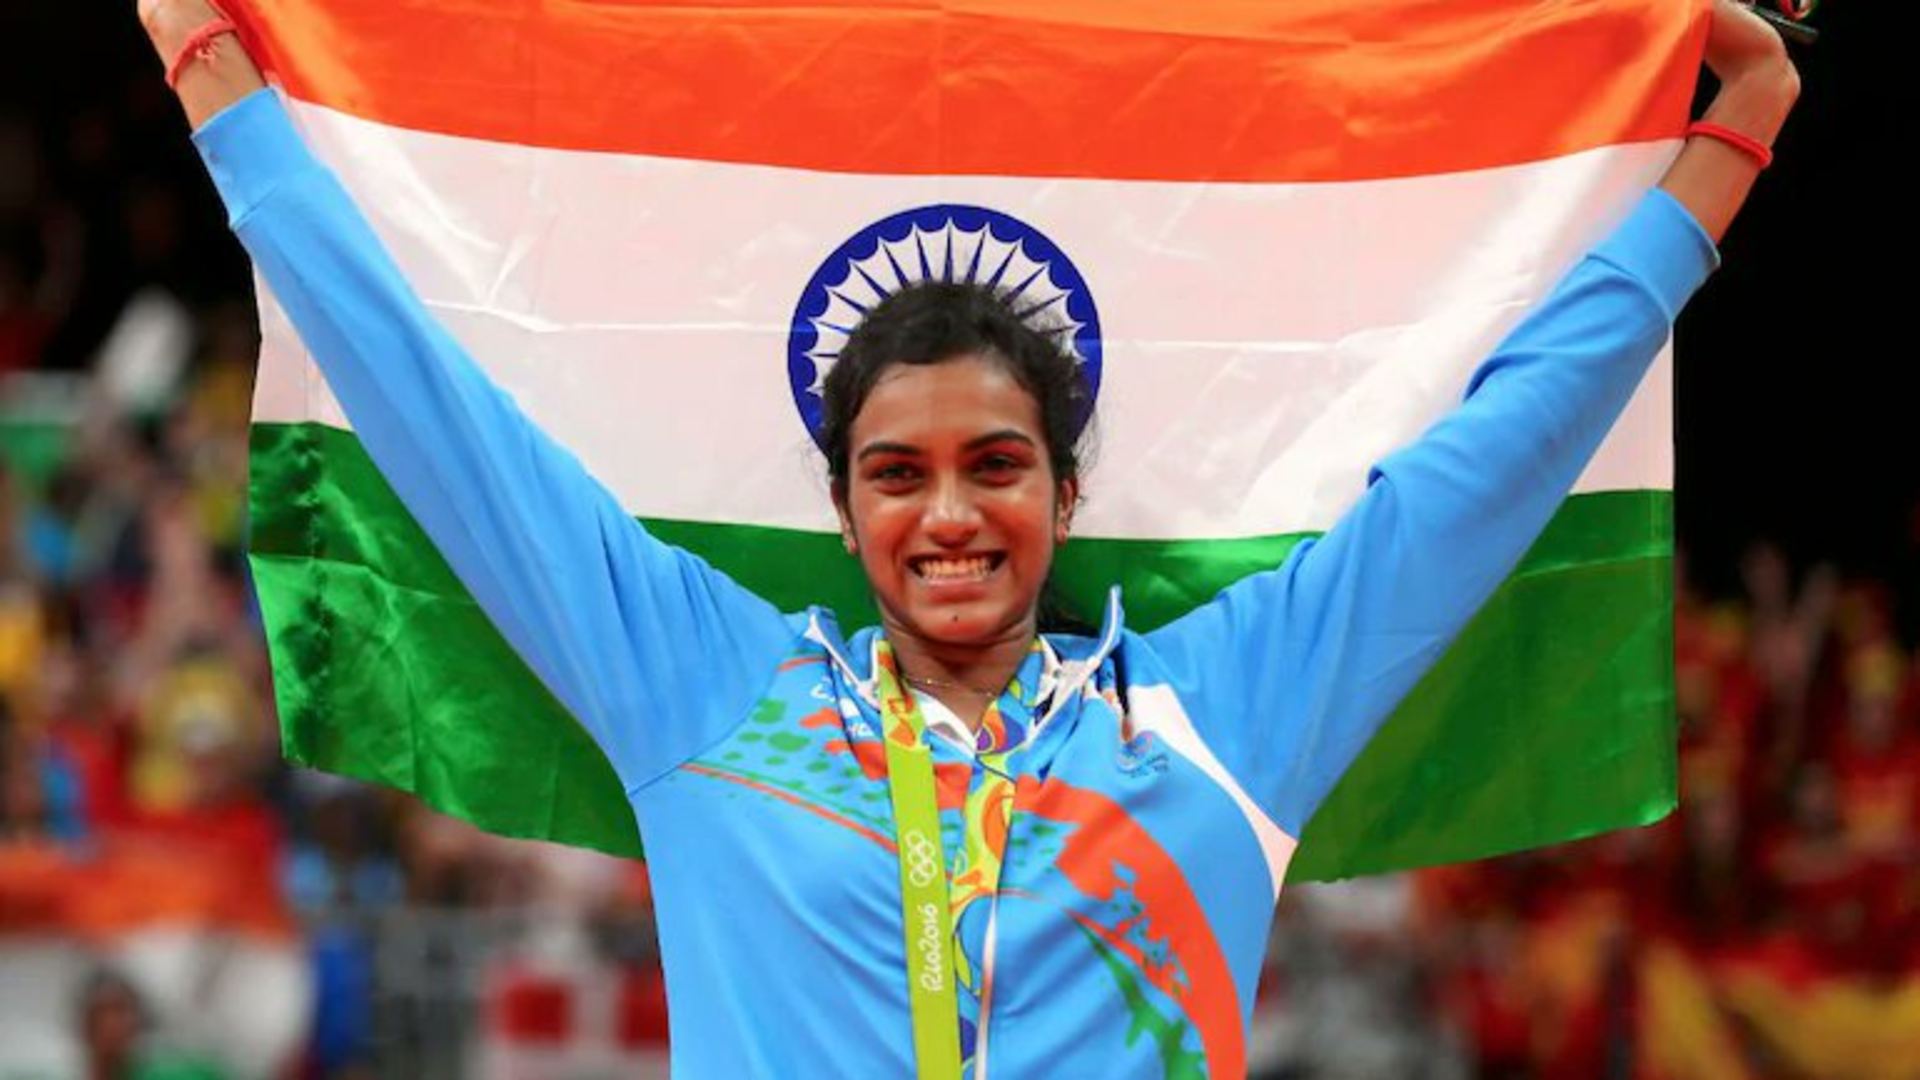 PV Sindhu with the Indian flag (Credit: Twitter/@Pvsindhu1)